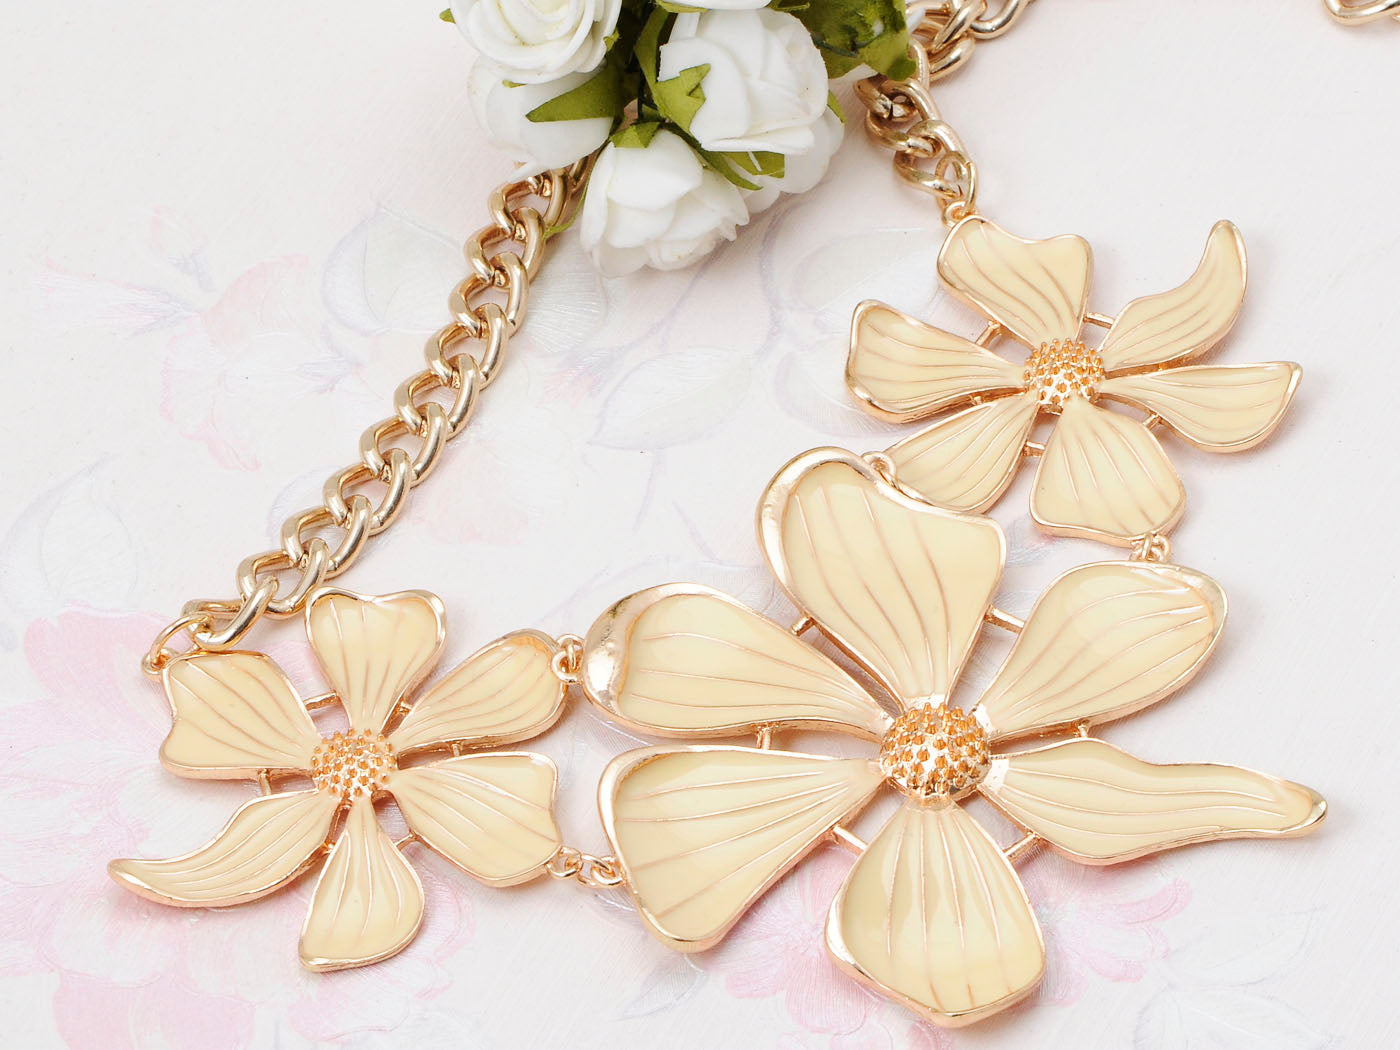 White Enamel Spring Hawaiian Flowers Necklace And Earring Set